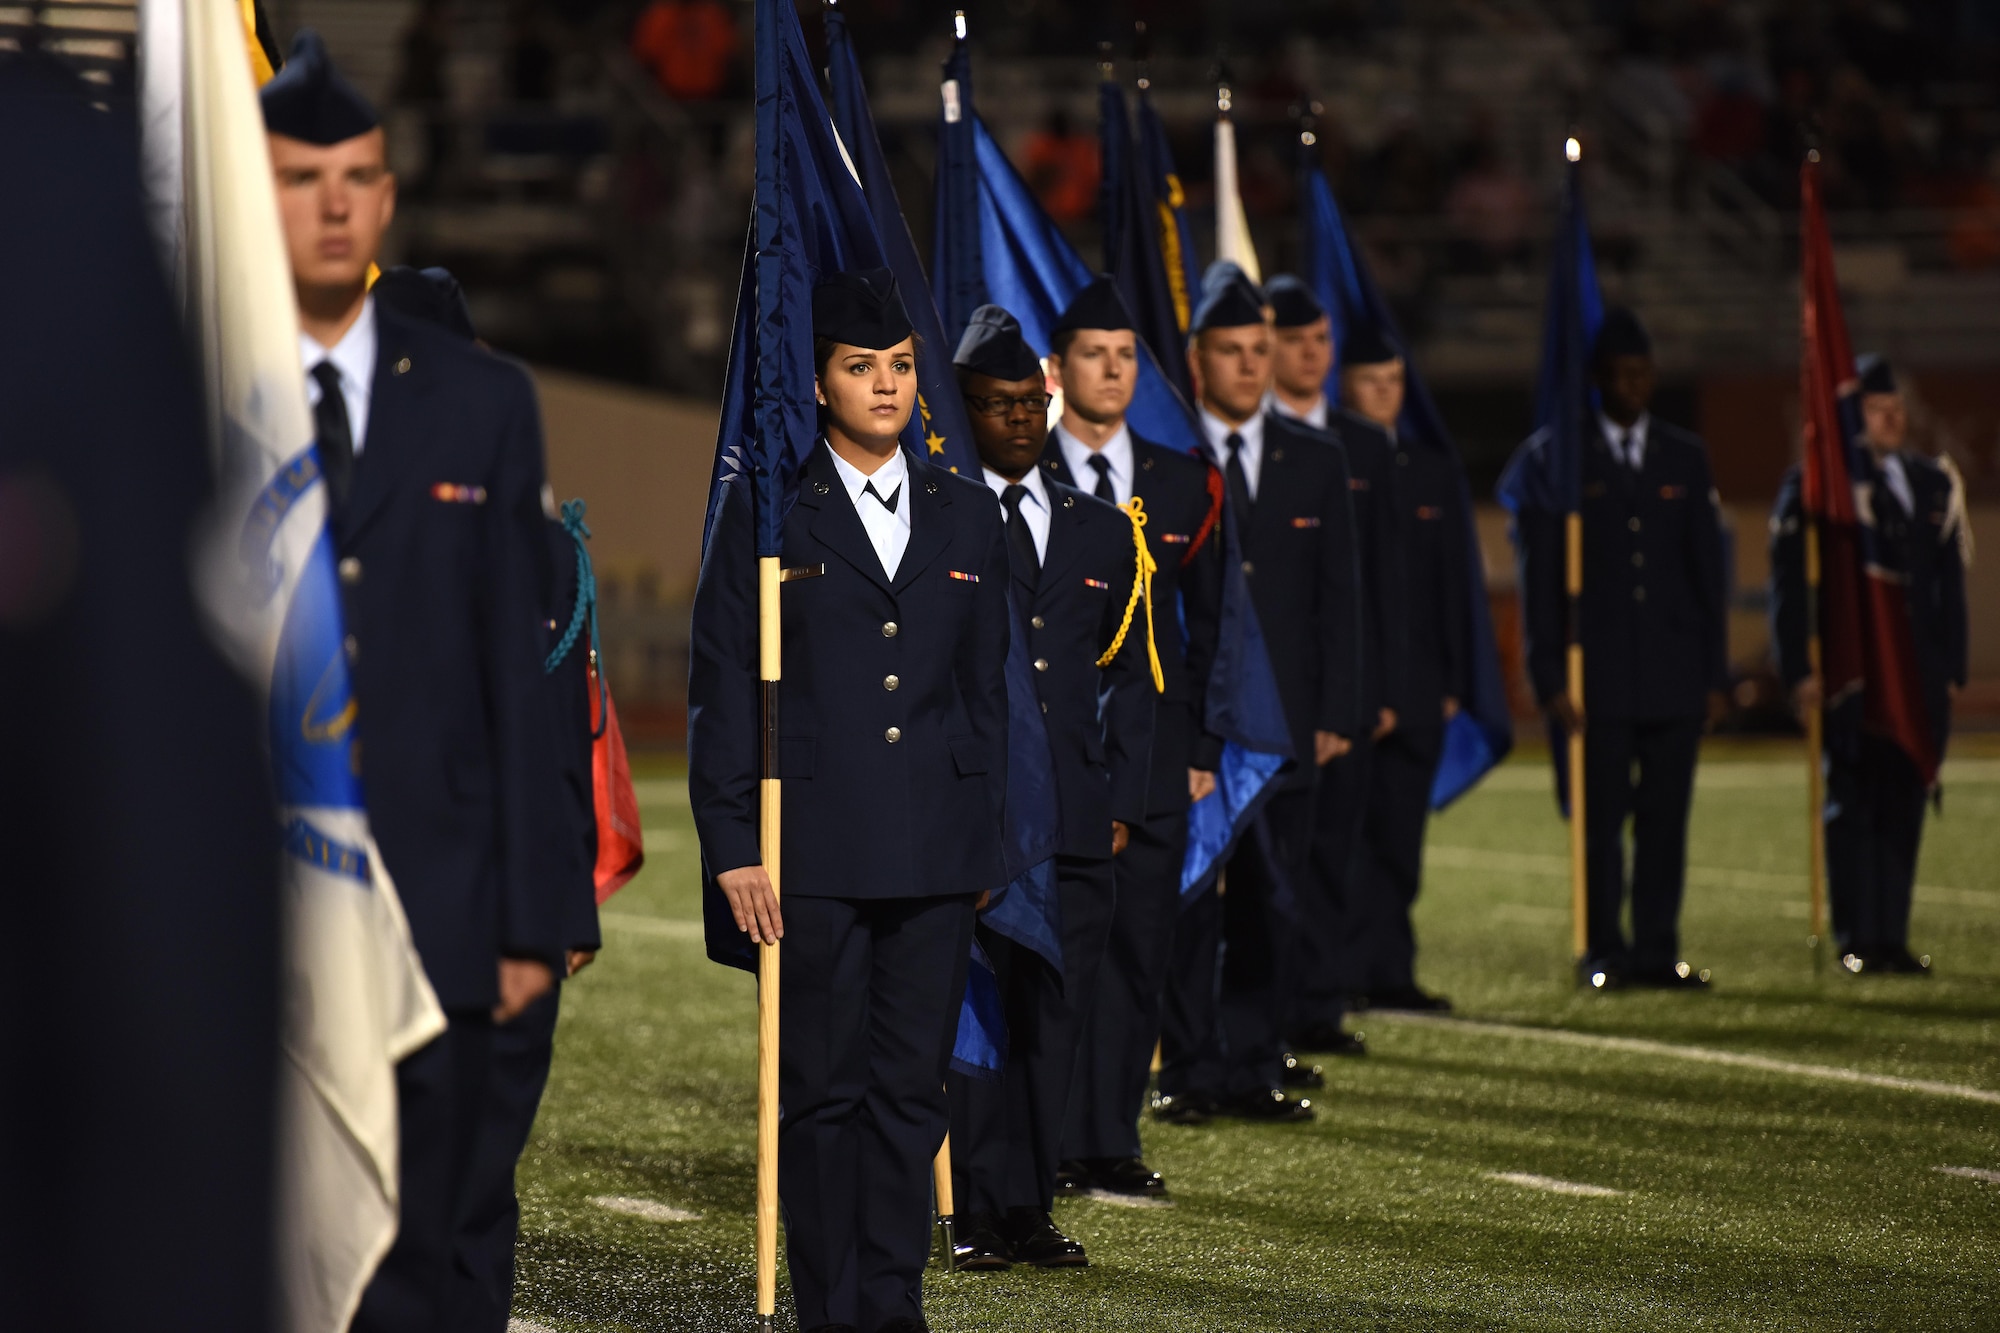 Goodfellow volunteers hold state flags during half-time of the Angelo State University Military Appreciation football game at the San Angelo Stadium, Texas, Nov. 12, 2016. The volunteers came from multiple training squadrons on Goodfellow Air Force Base. (U.S. Air Force photo by Airman 1st Class Caelynn Ferguson/Released)